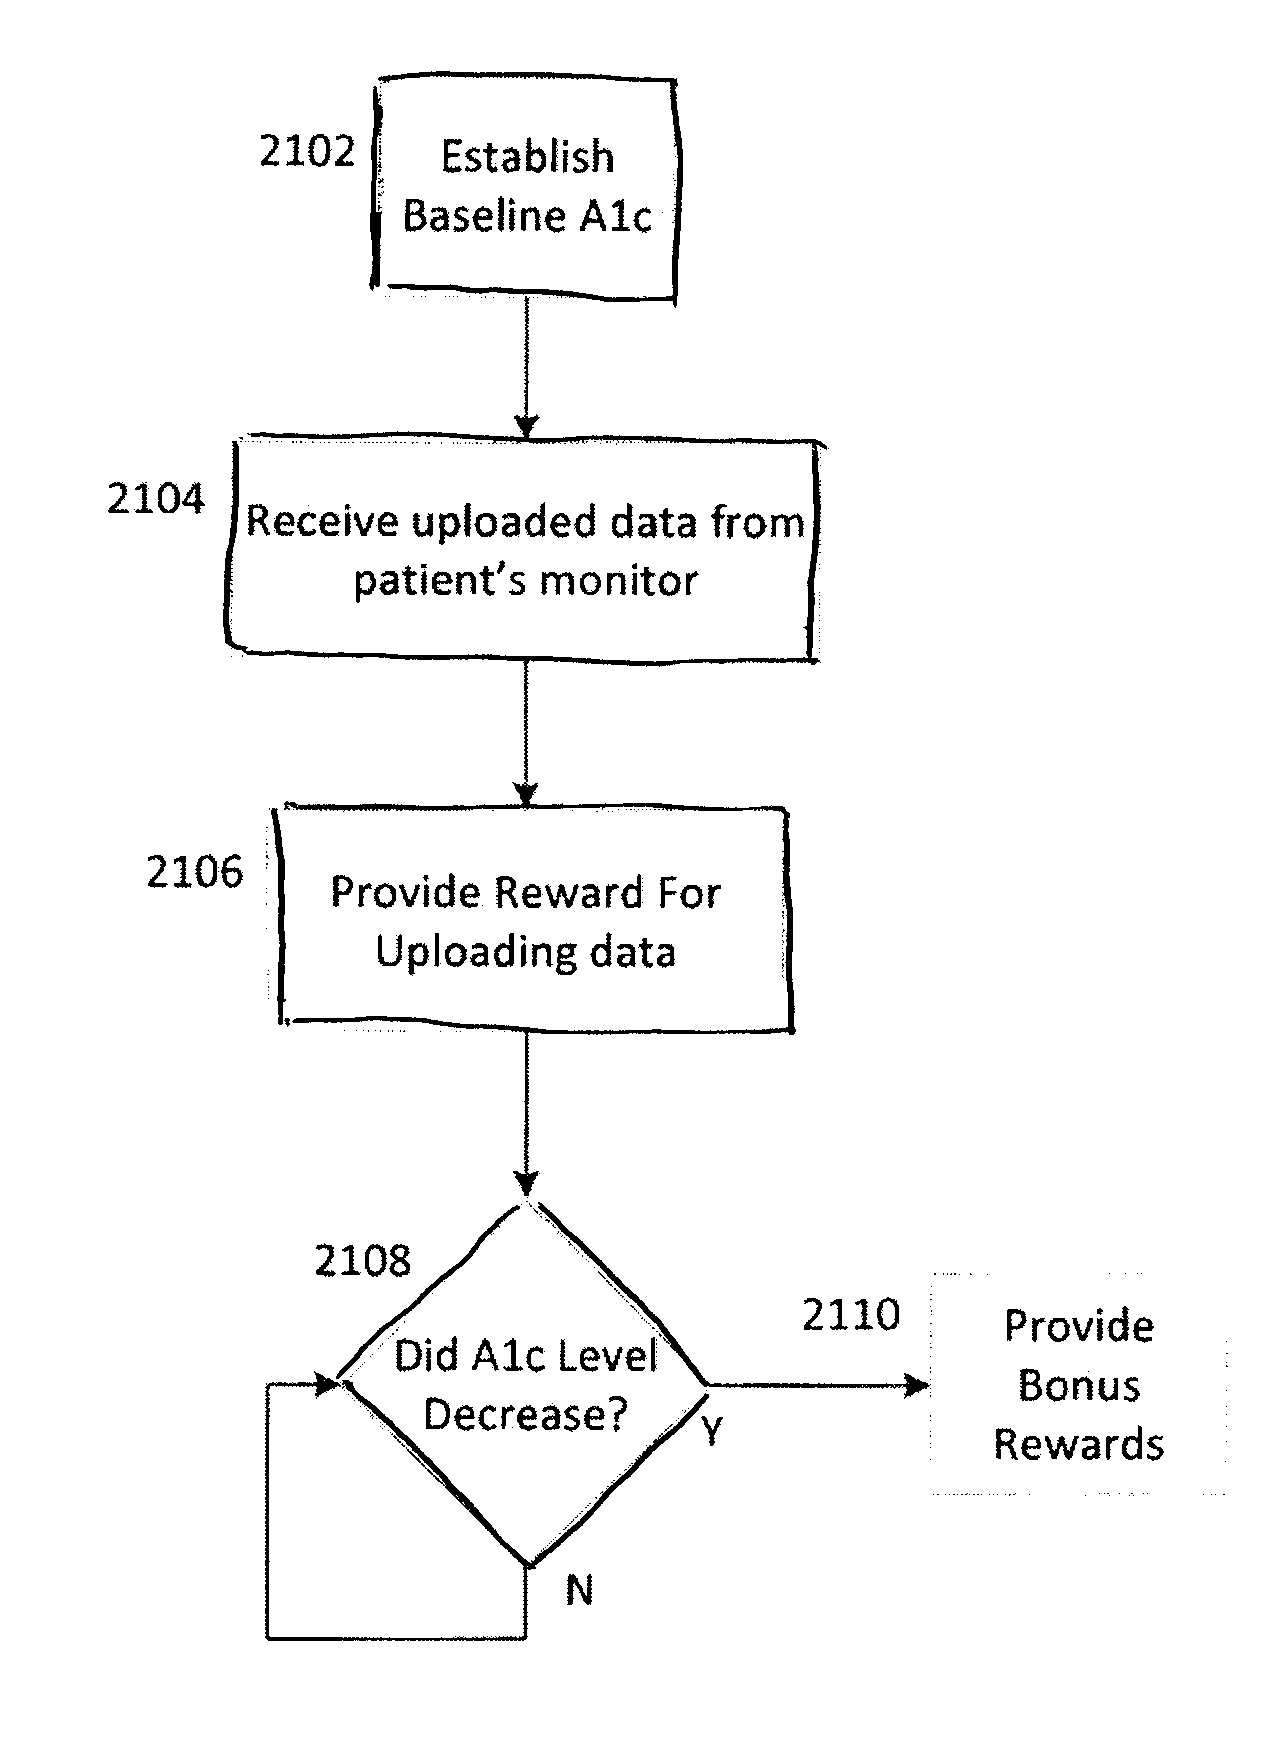 System and Method for Utilizing Incentives to Promote Patient Compliance and Improve Patient Outcome